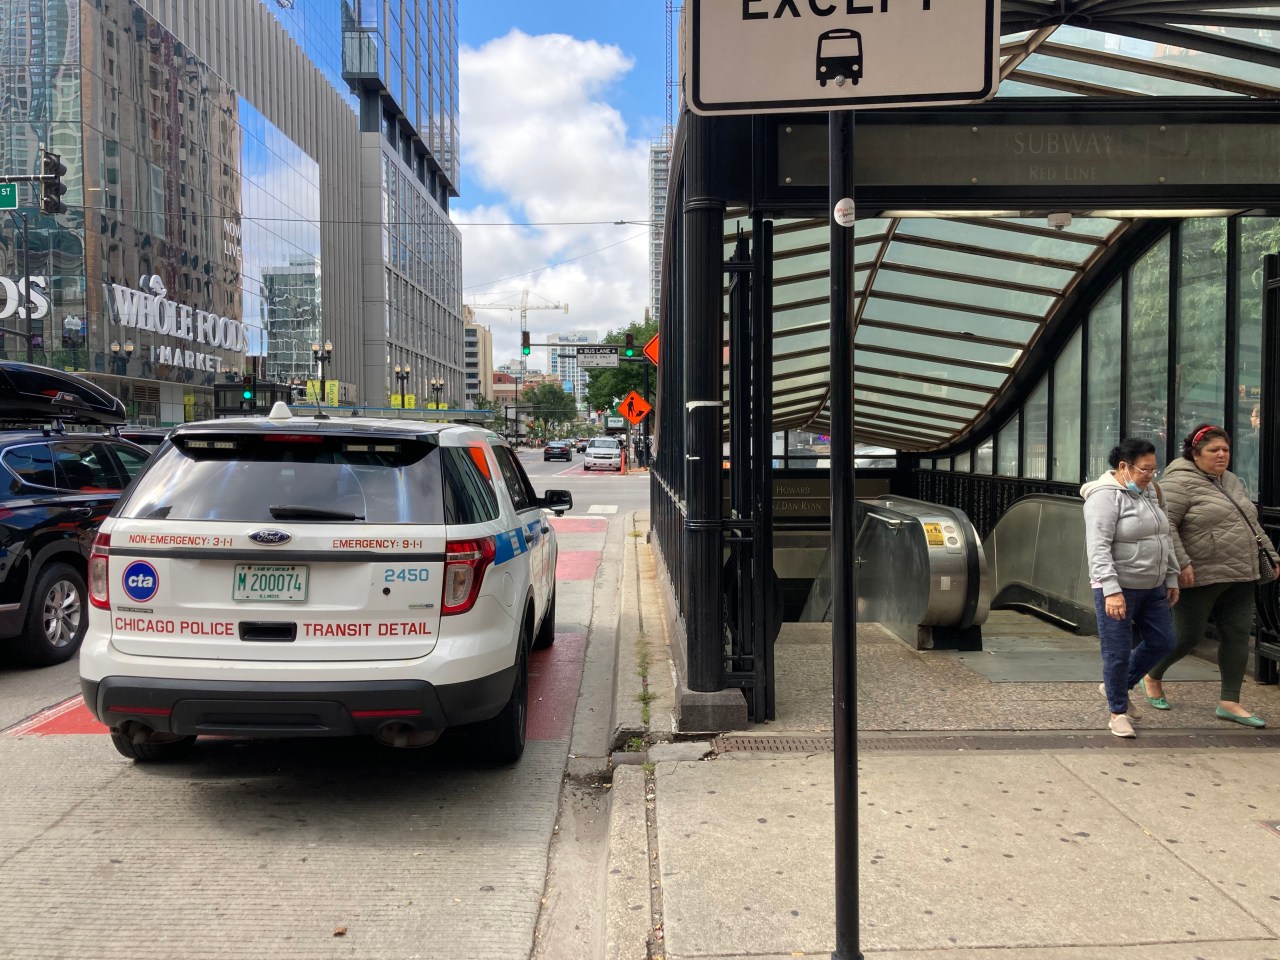 A Chicago Police transit detail vehicle parked in a bus lane by the Chicago Avenue Red Line entrance, during non-bus lane hours. Photo: John Greenfield